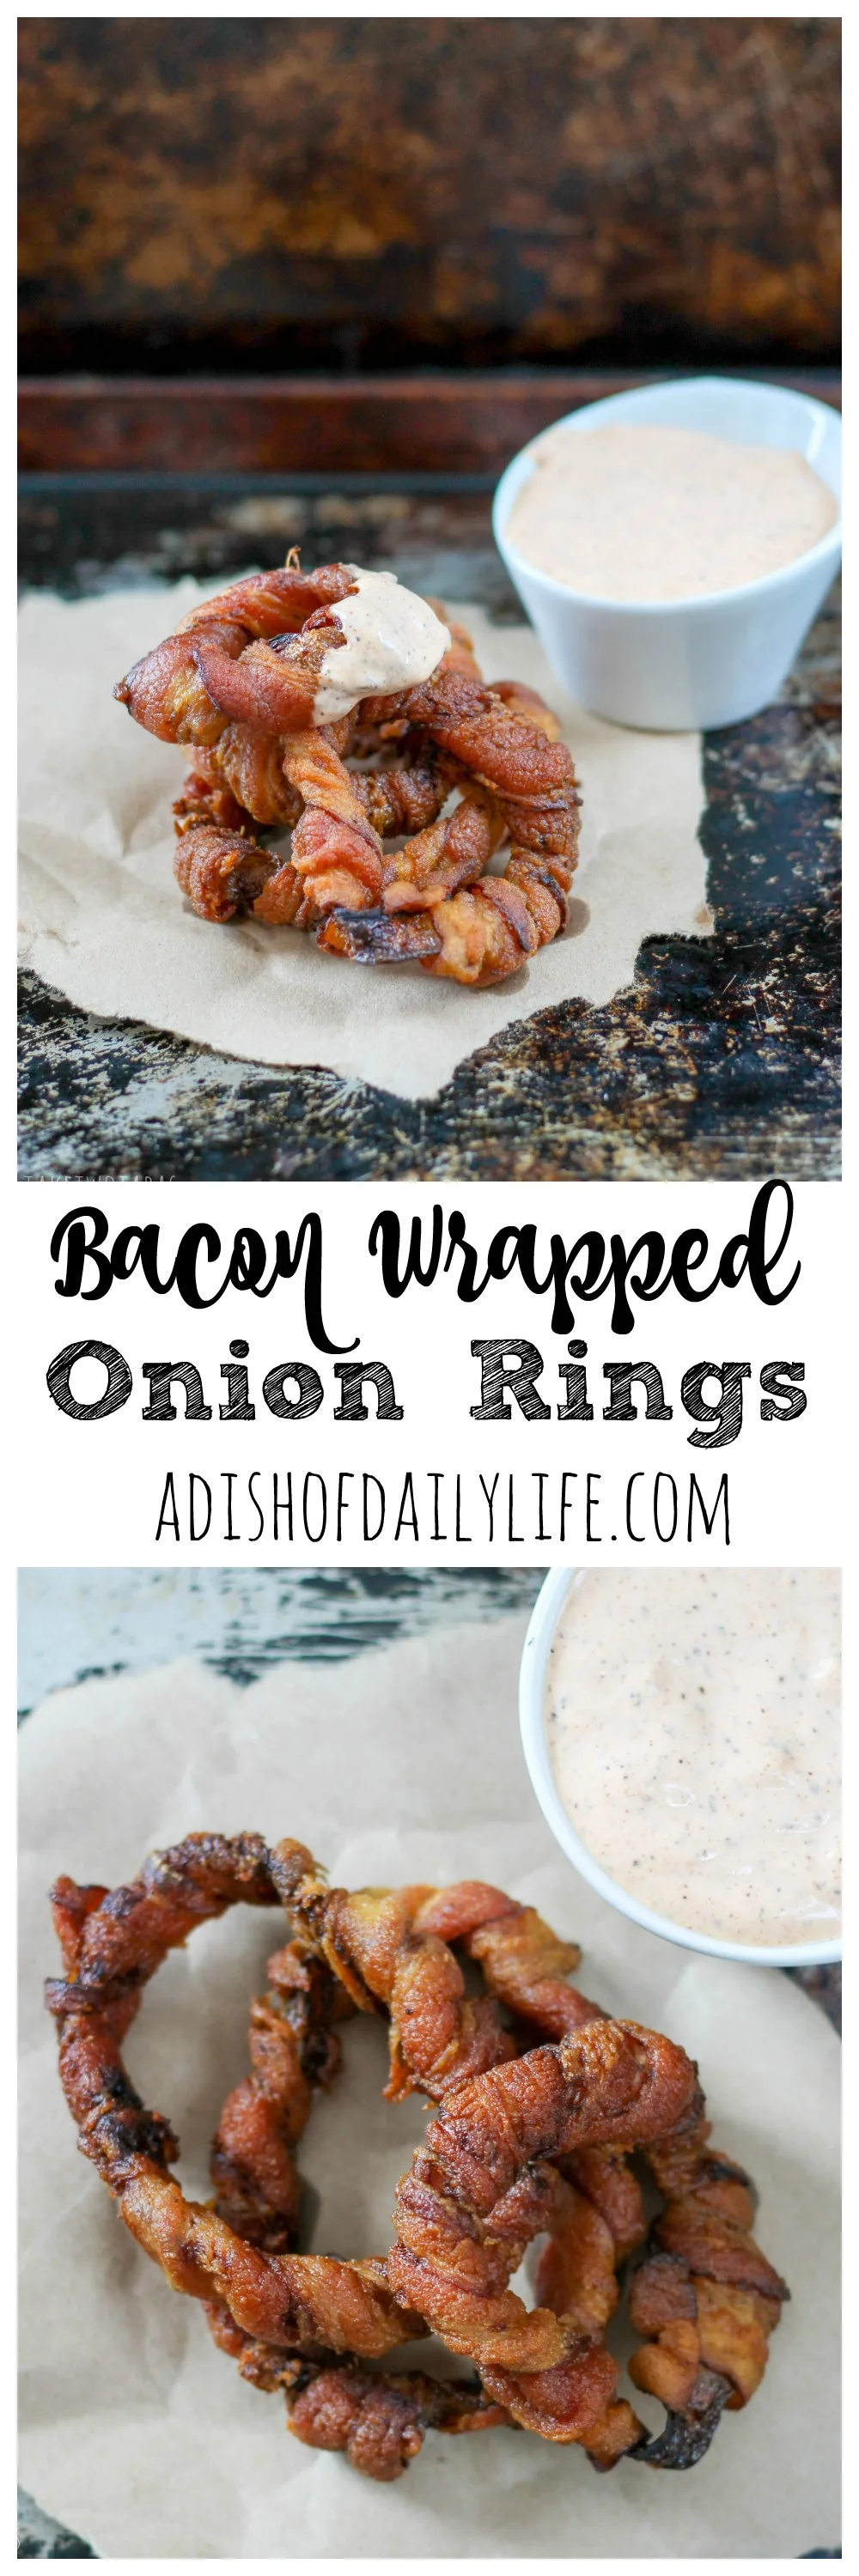 These crispy bacon-wrapped onion rings are the perfect finger food for a party, as a side dish for your burger, or just an afternoon snack with friends. Dipped in chipotle sauce, they are a crowd-pleaser!